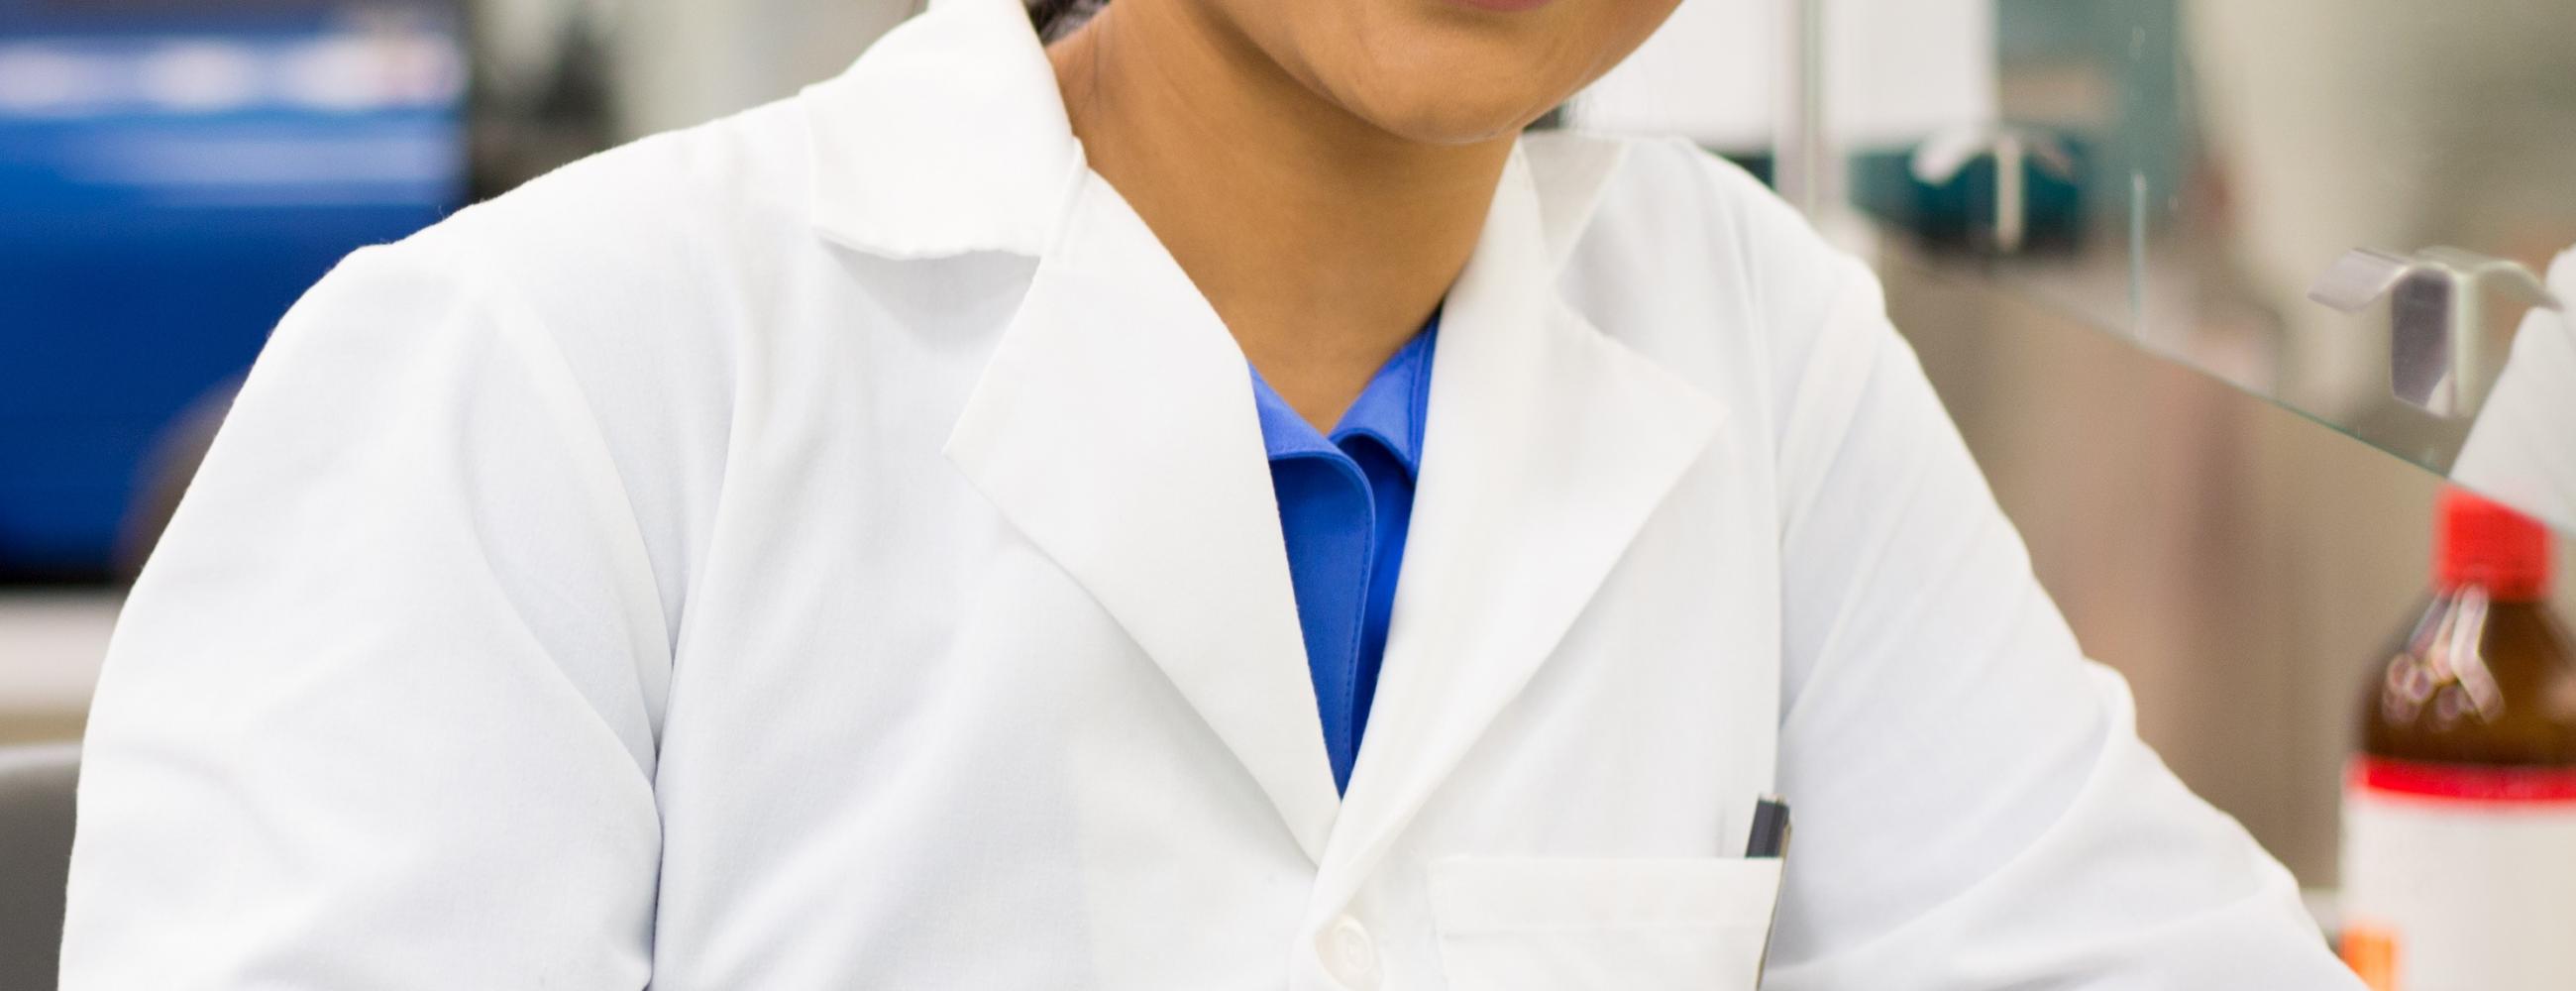 Young woman in labcoat and gloves smiling at the camera in a lab setting